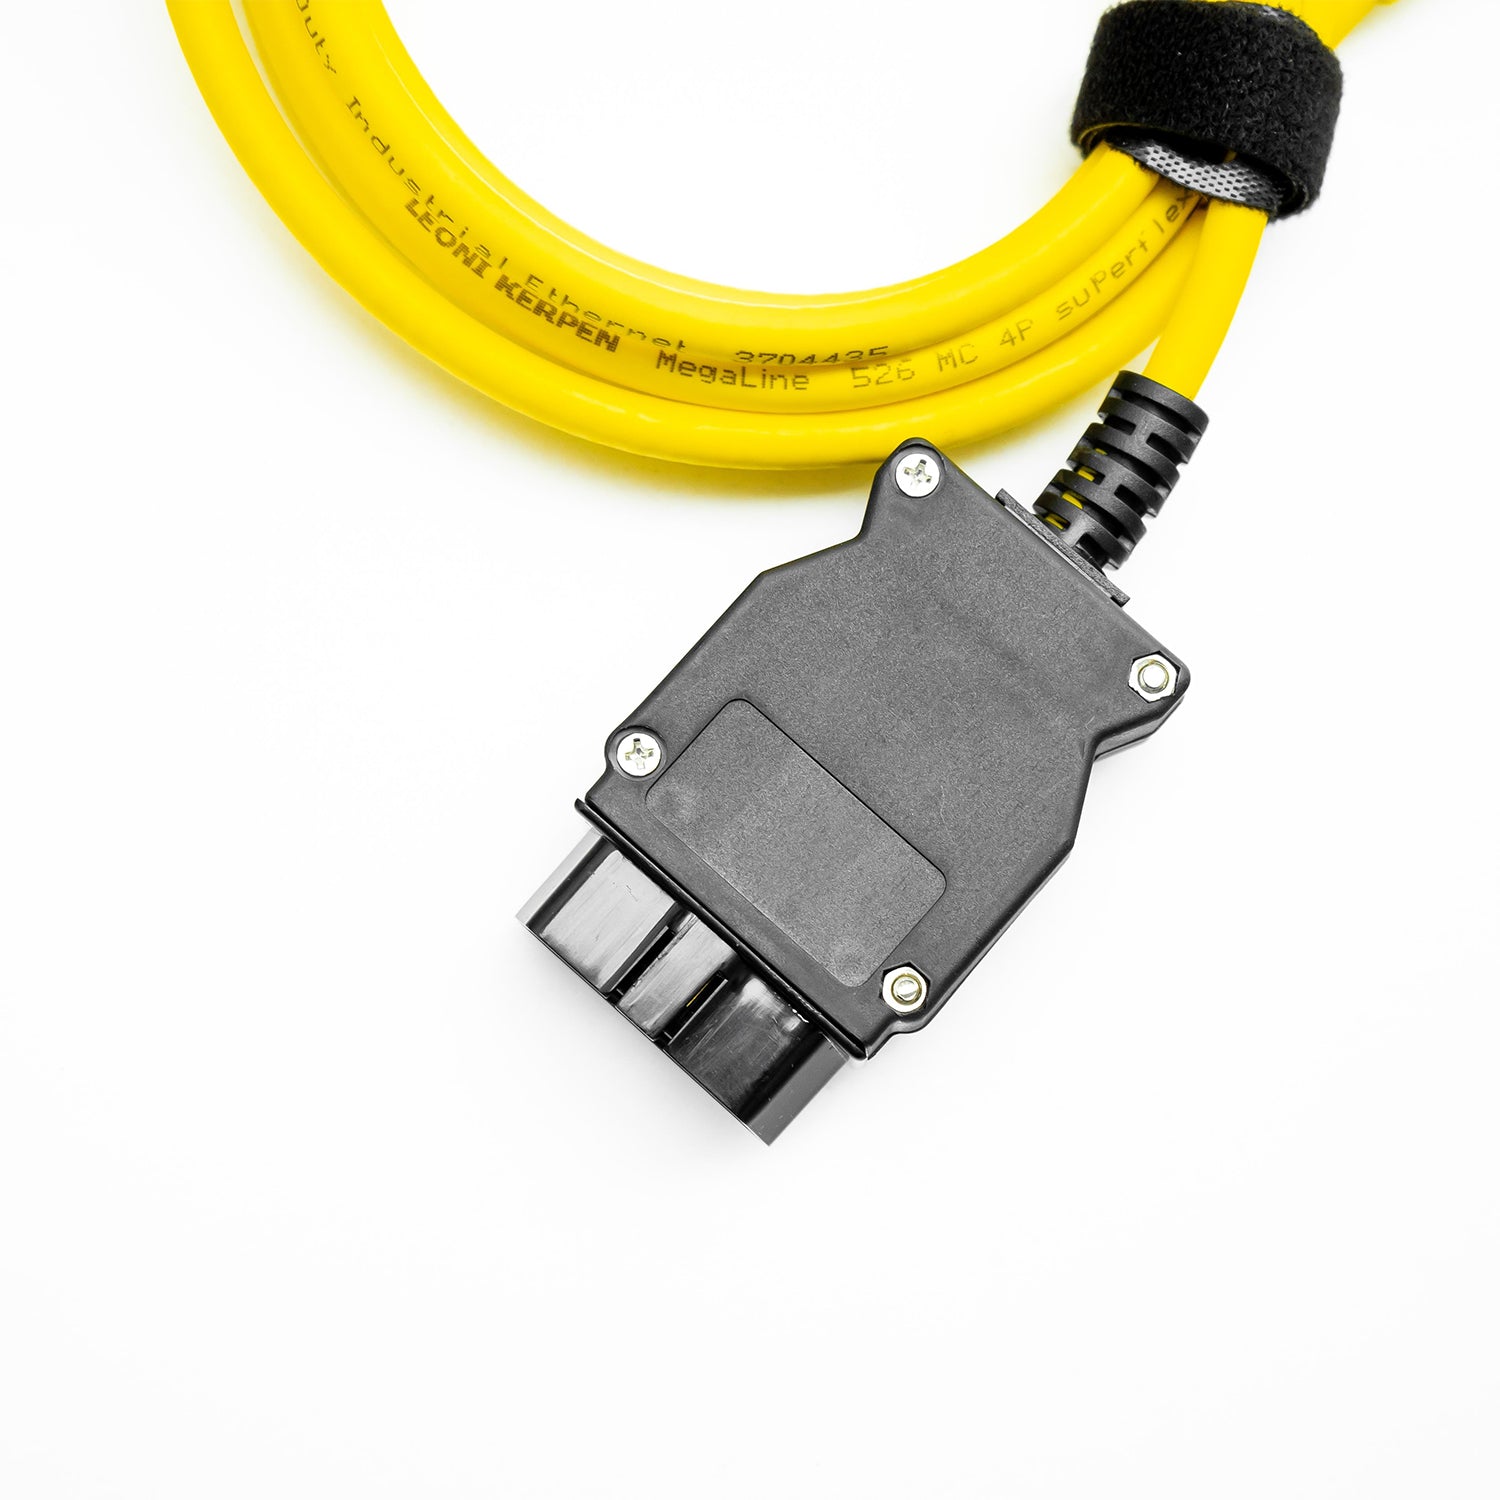 BMDiag ENET BMW Cable For BMW F, G & I Series